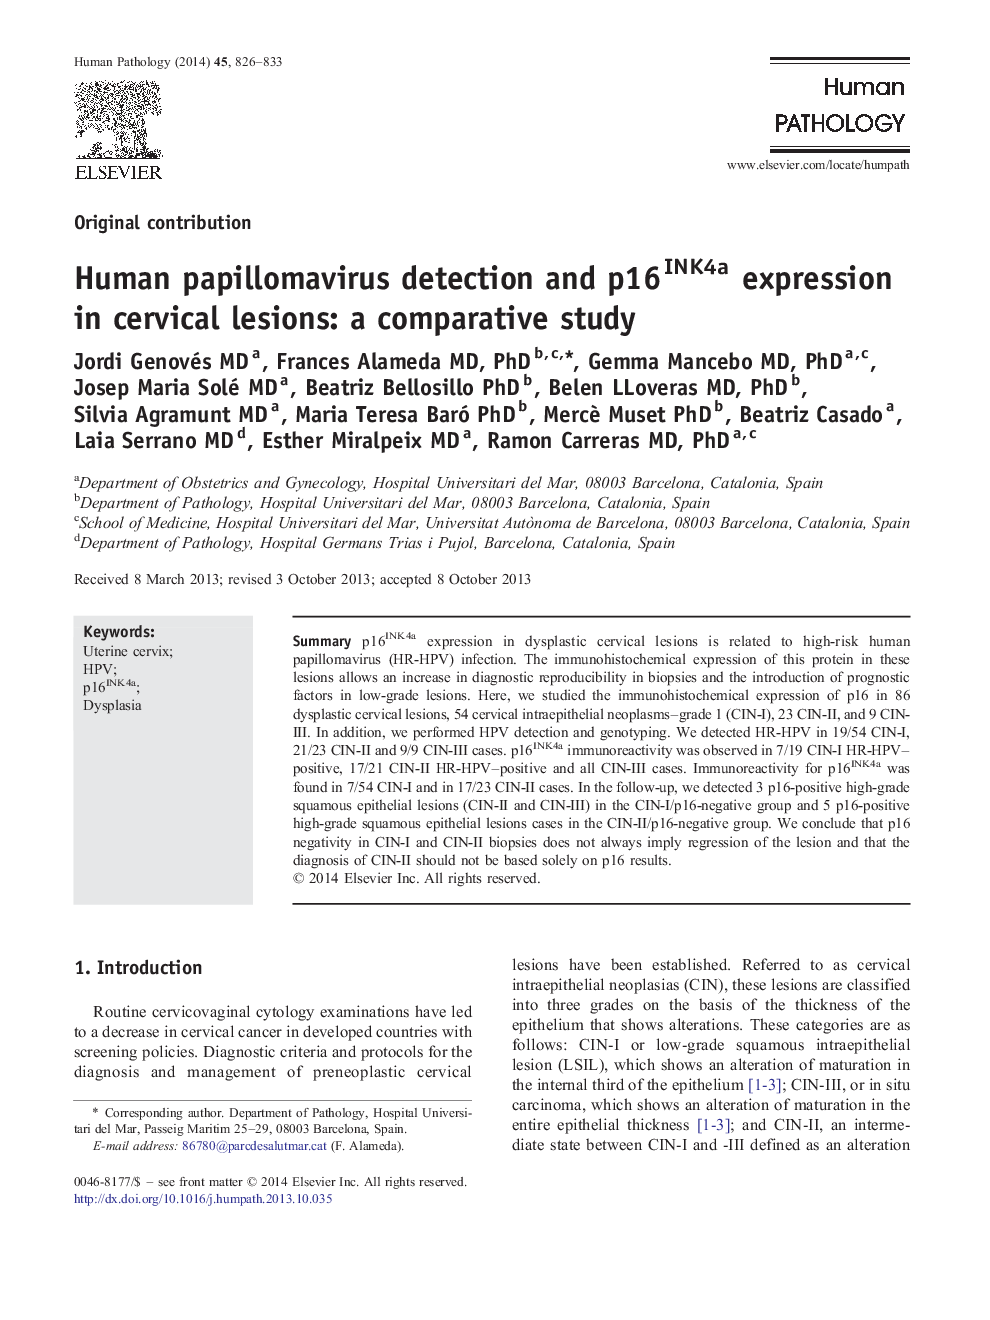 Human papillomavirus detection and p16INK4a expression in cervical lesions: a comparative study